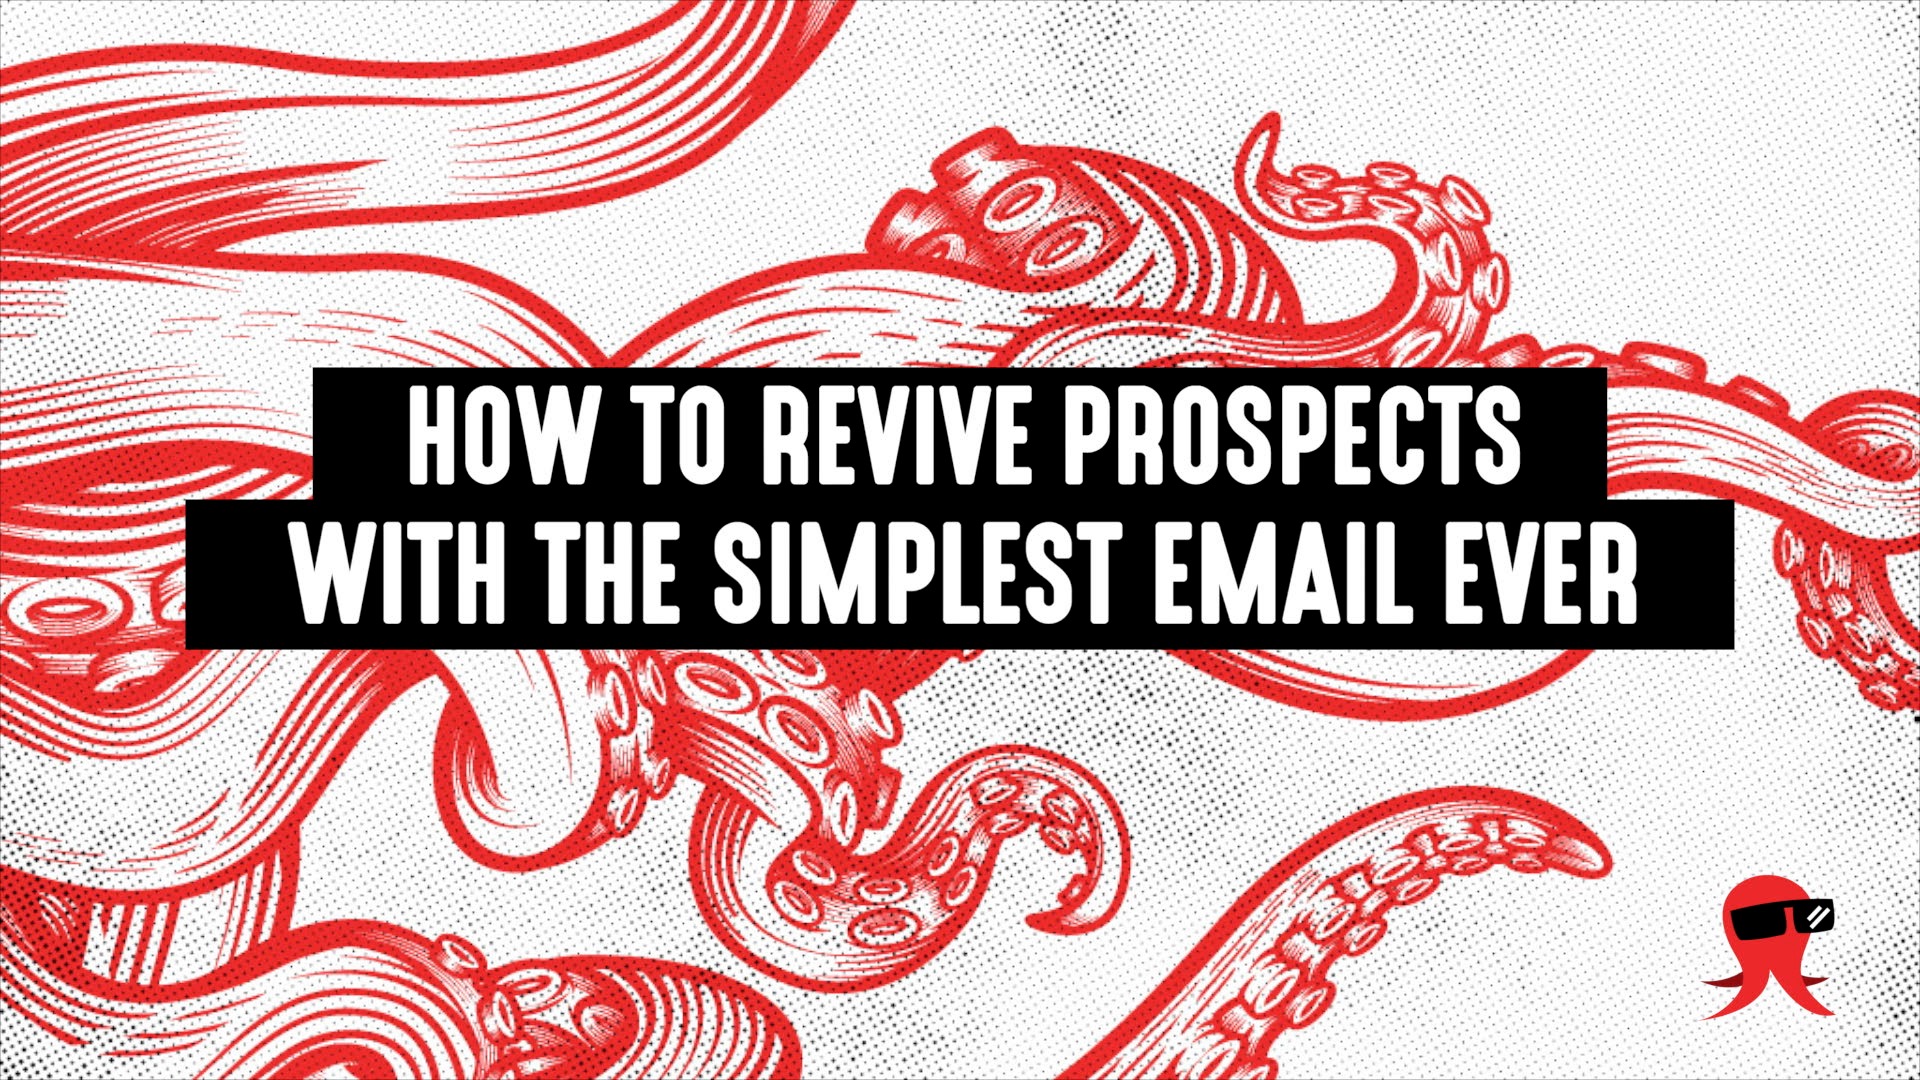 How to Revive Prospects with the Simplest Email Ever